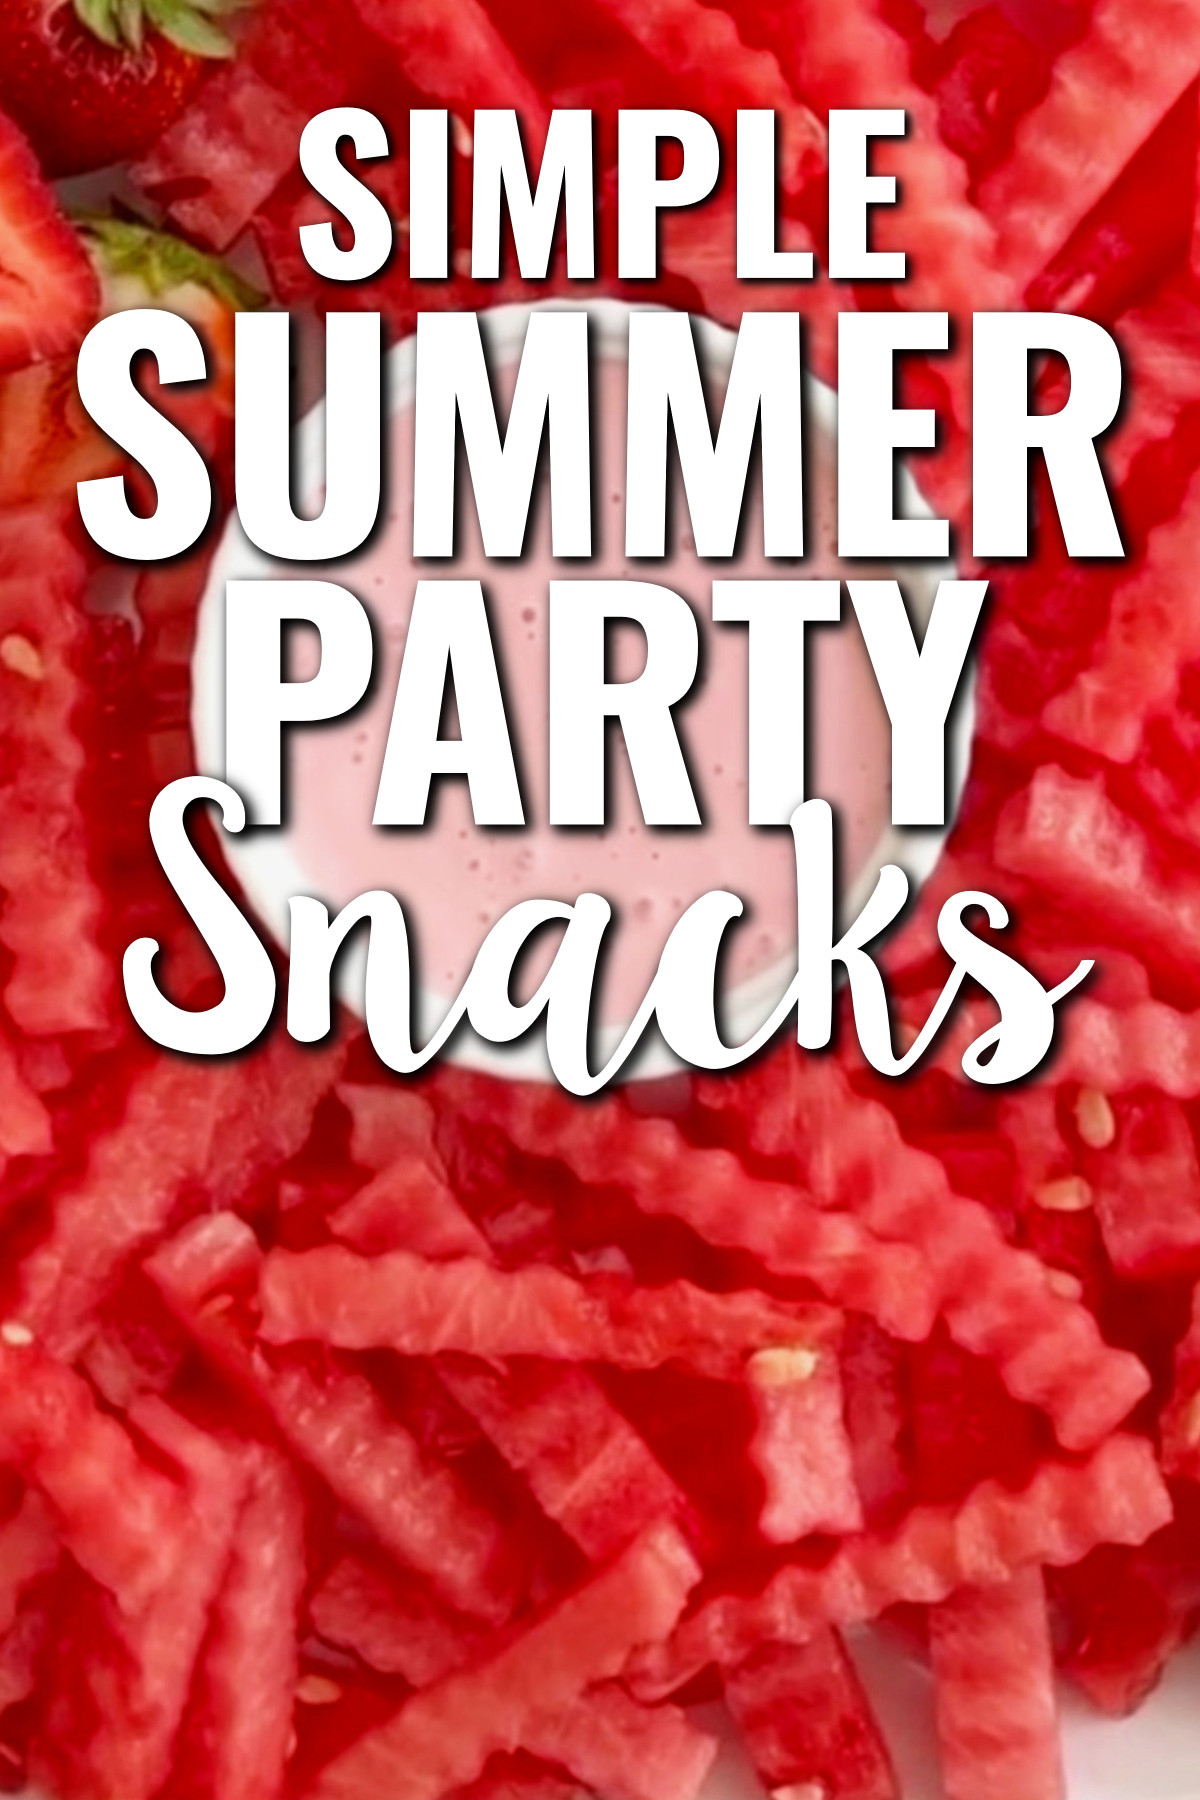 Simple Summer Party Snacks